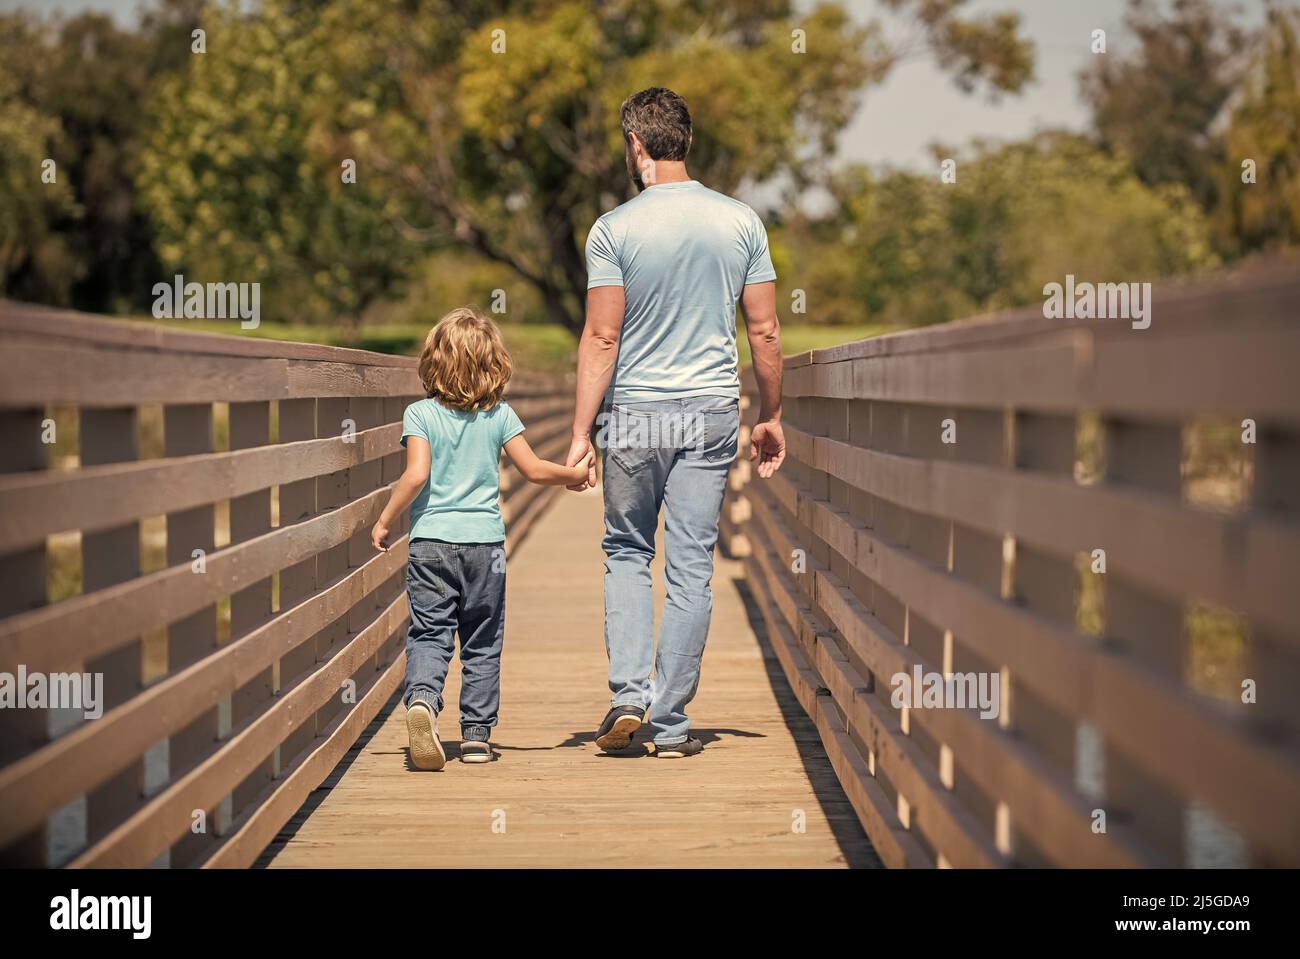 fathers day. father and son walking outdoor back view. family value. childhood and parenthood. Stock Photo